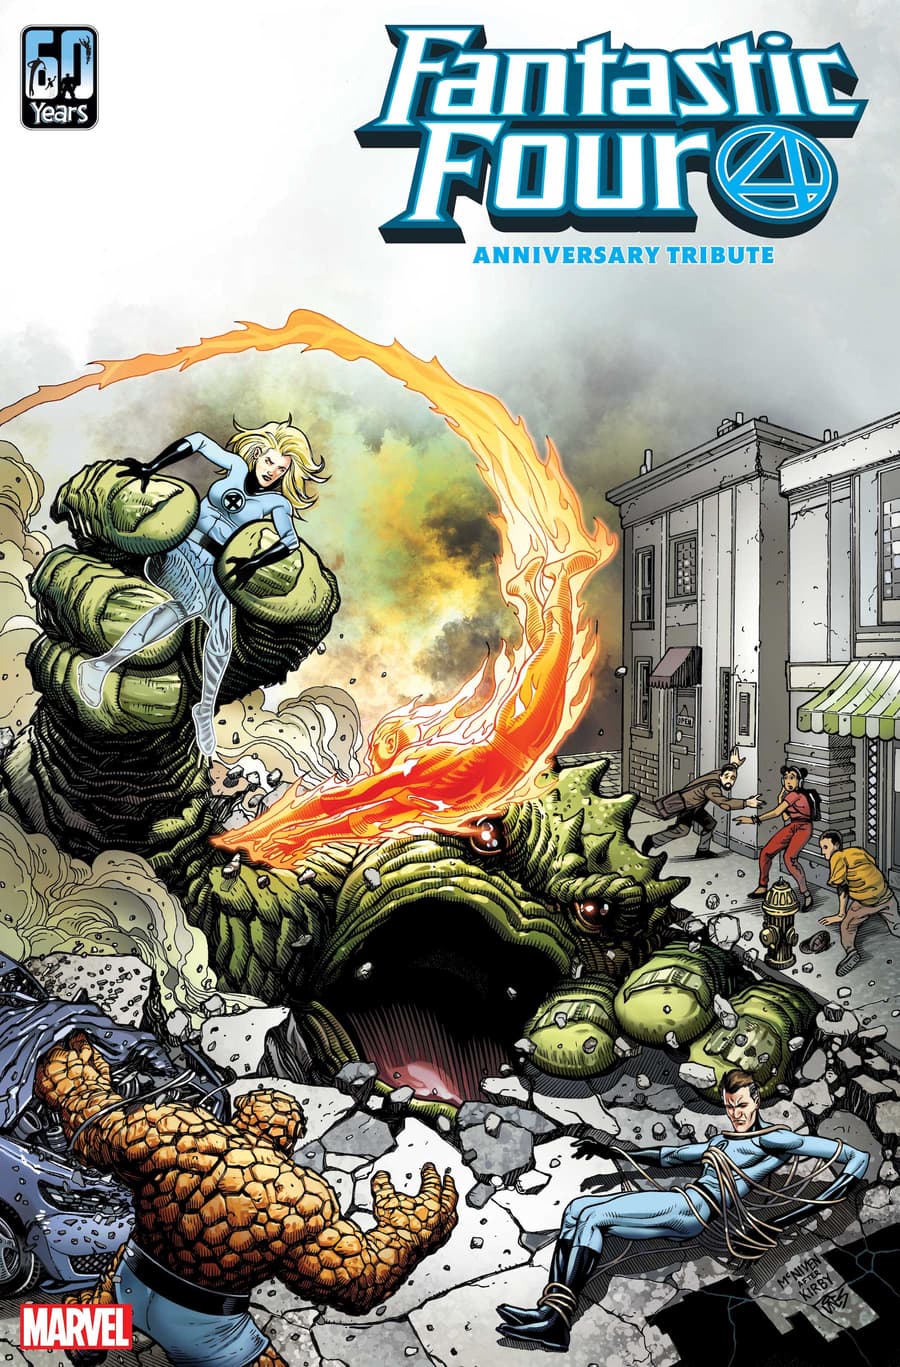 FANTASTIC FOUR ANNIVERSARY TRIBUTE #1 cover by Steve McNiven